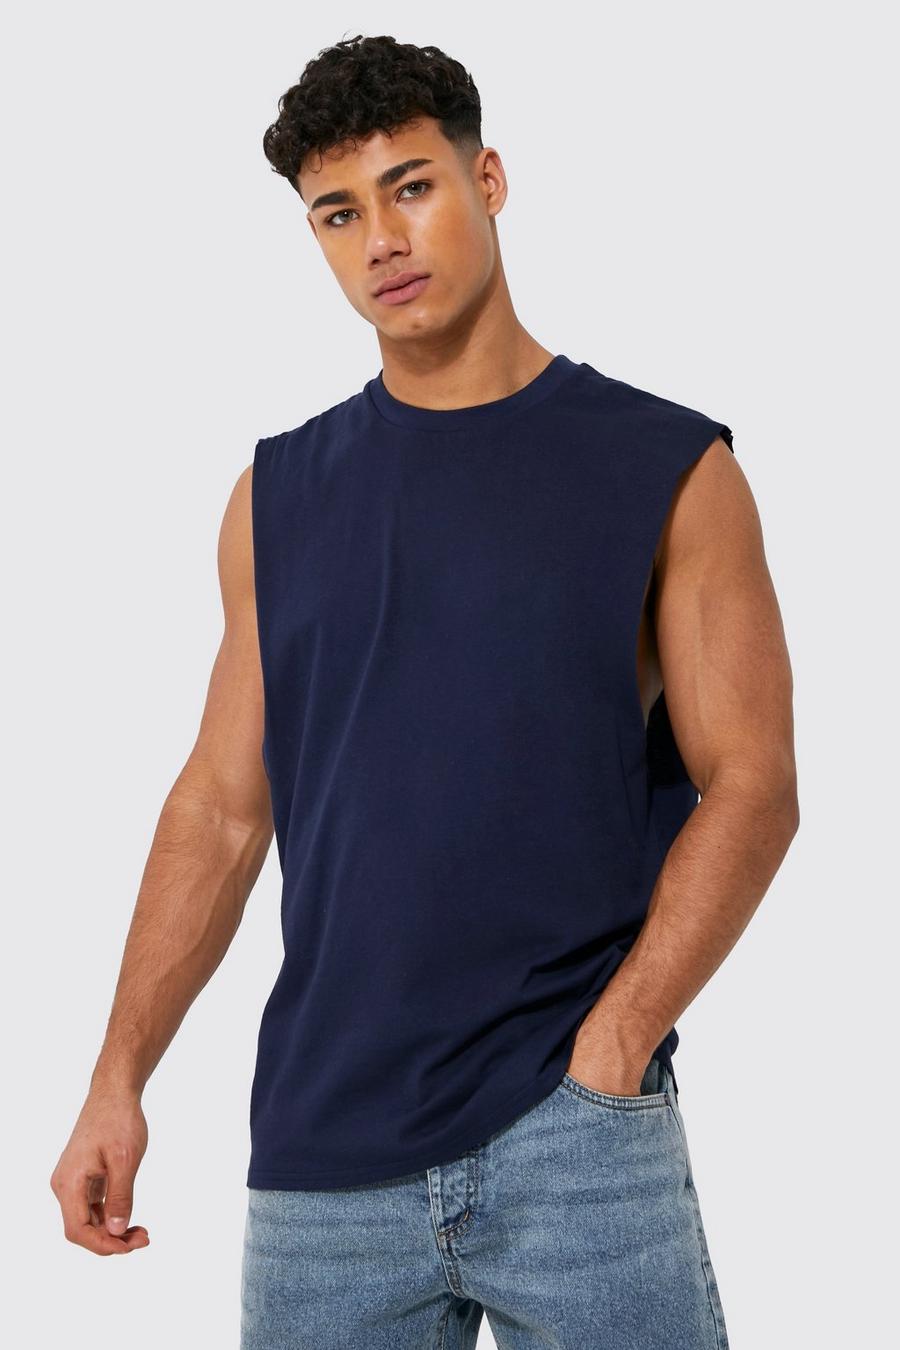 Navy Basic Drop Armhole Tank with REEL Cotton